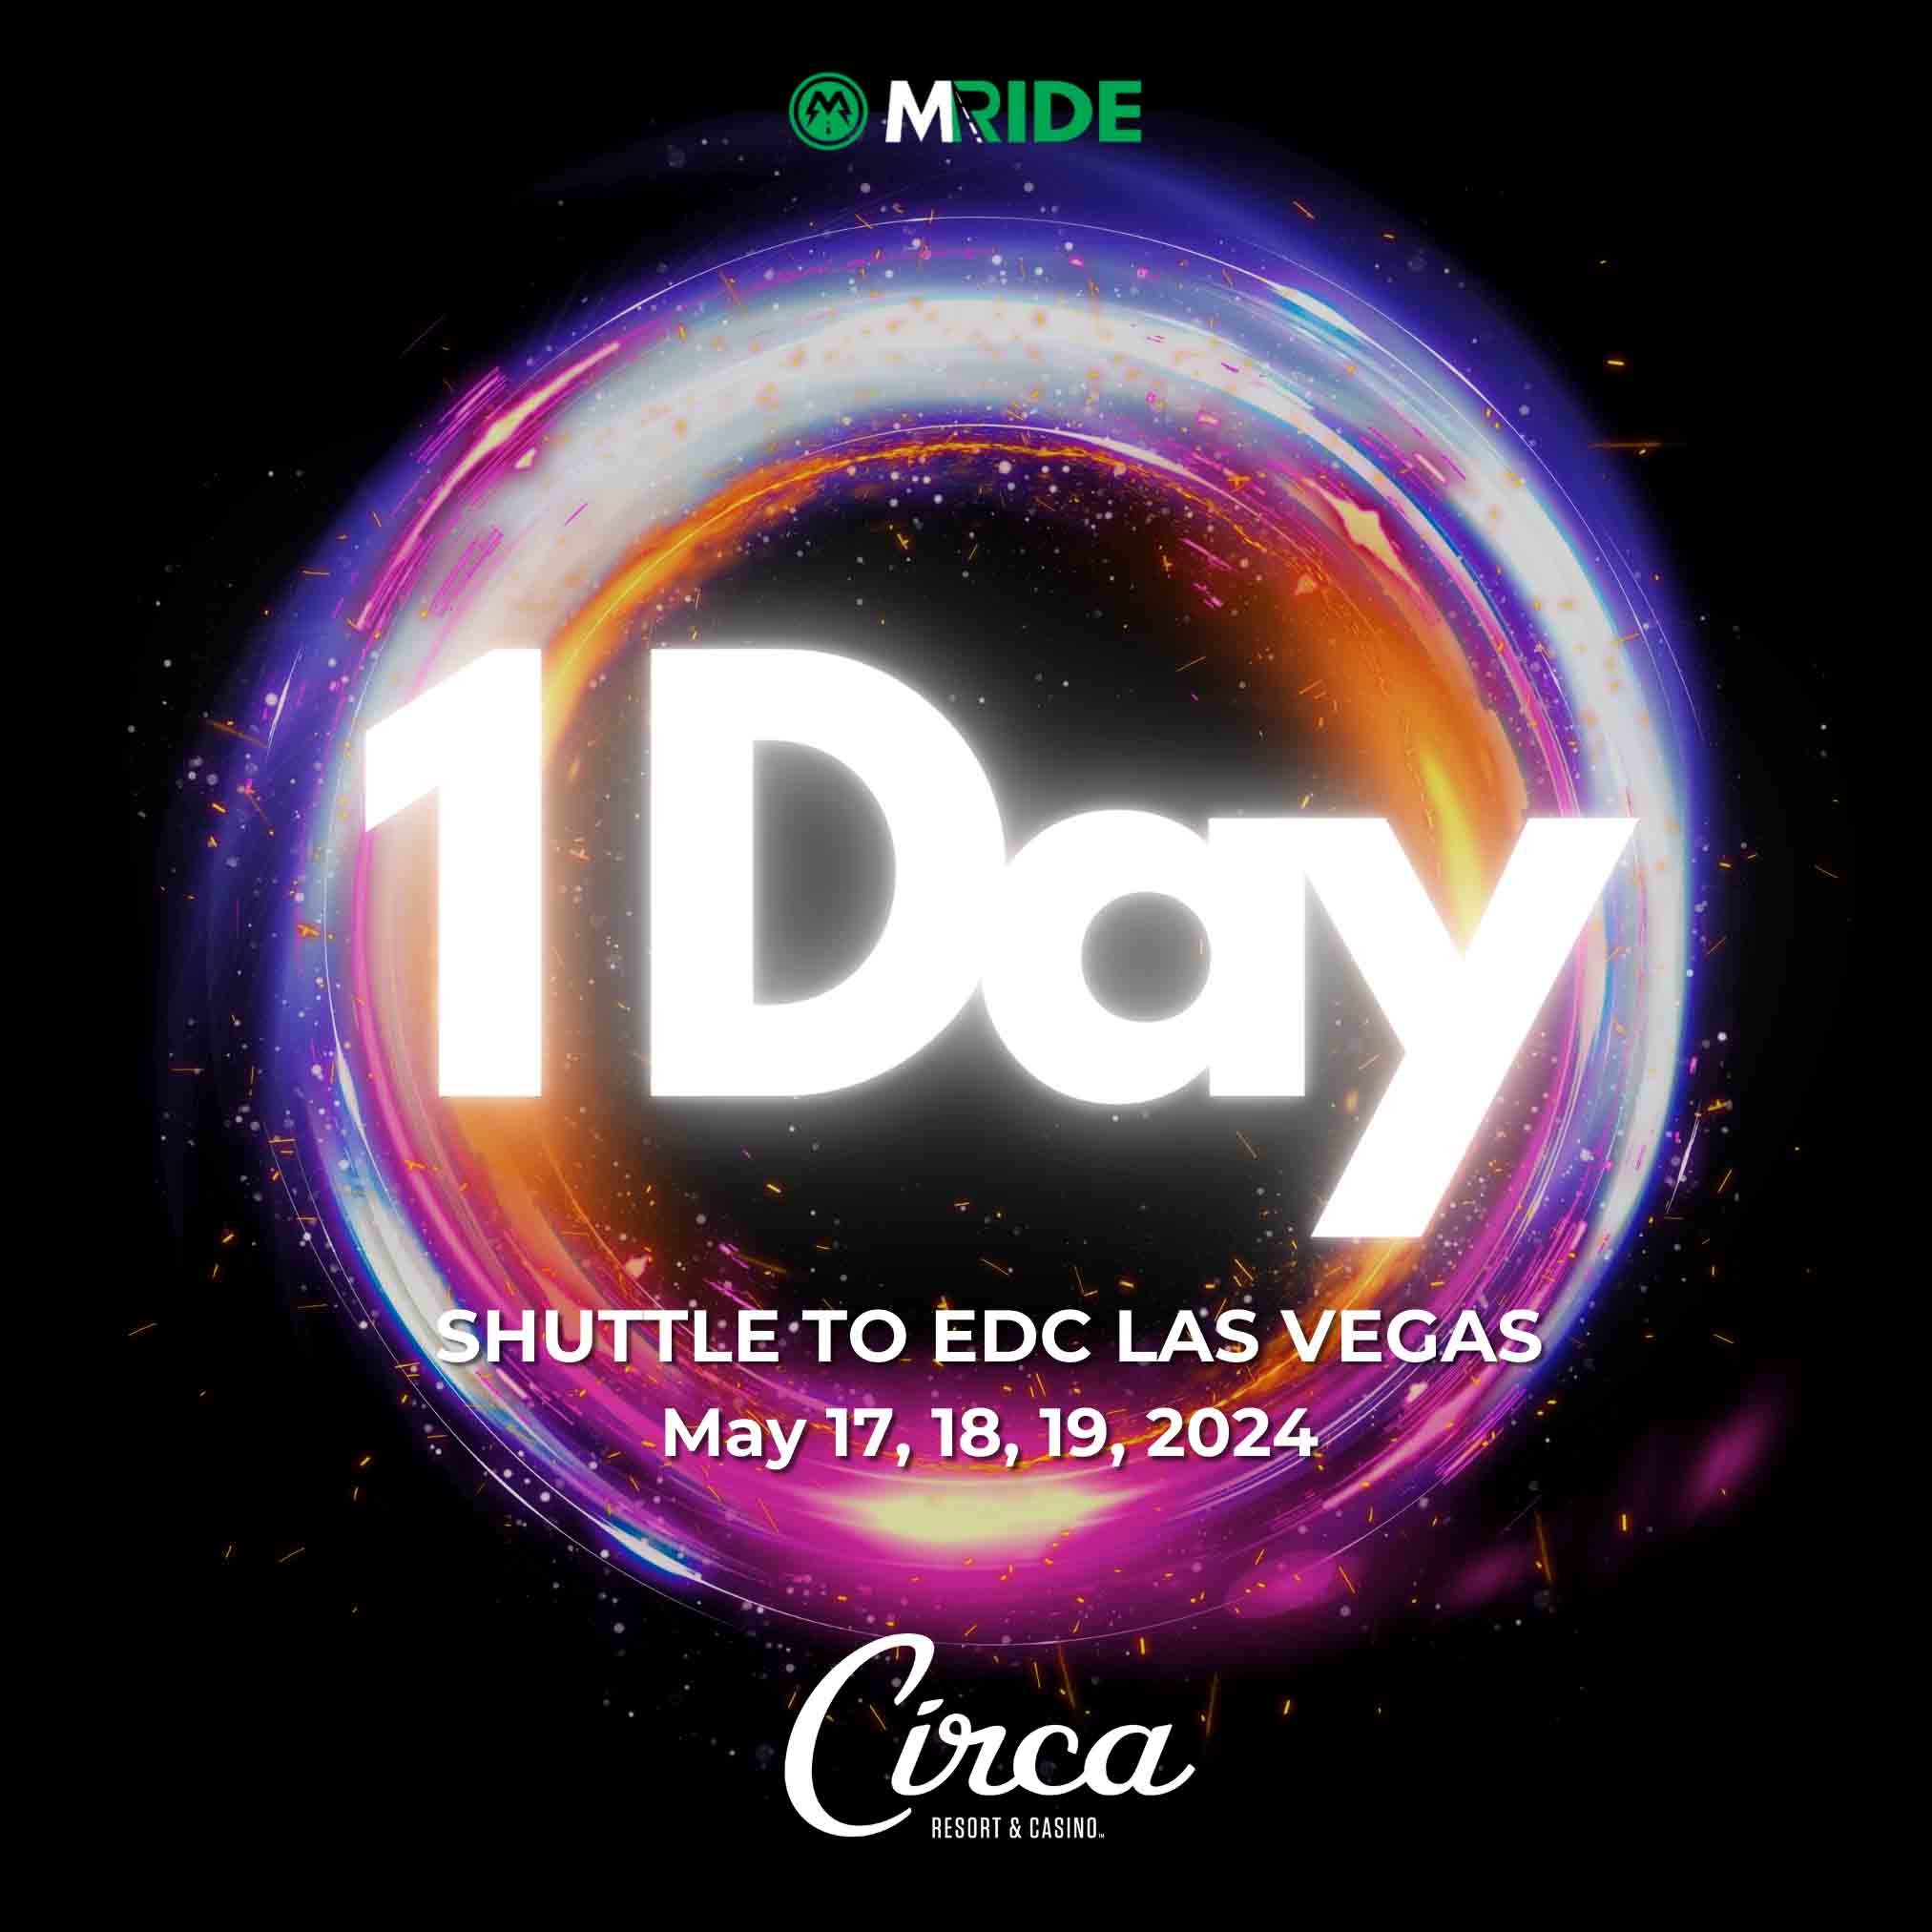 M Ride 1 Day Shuttle Pass to Edc Las Vegas from Circa Hotel